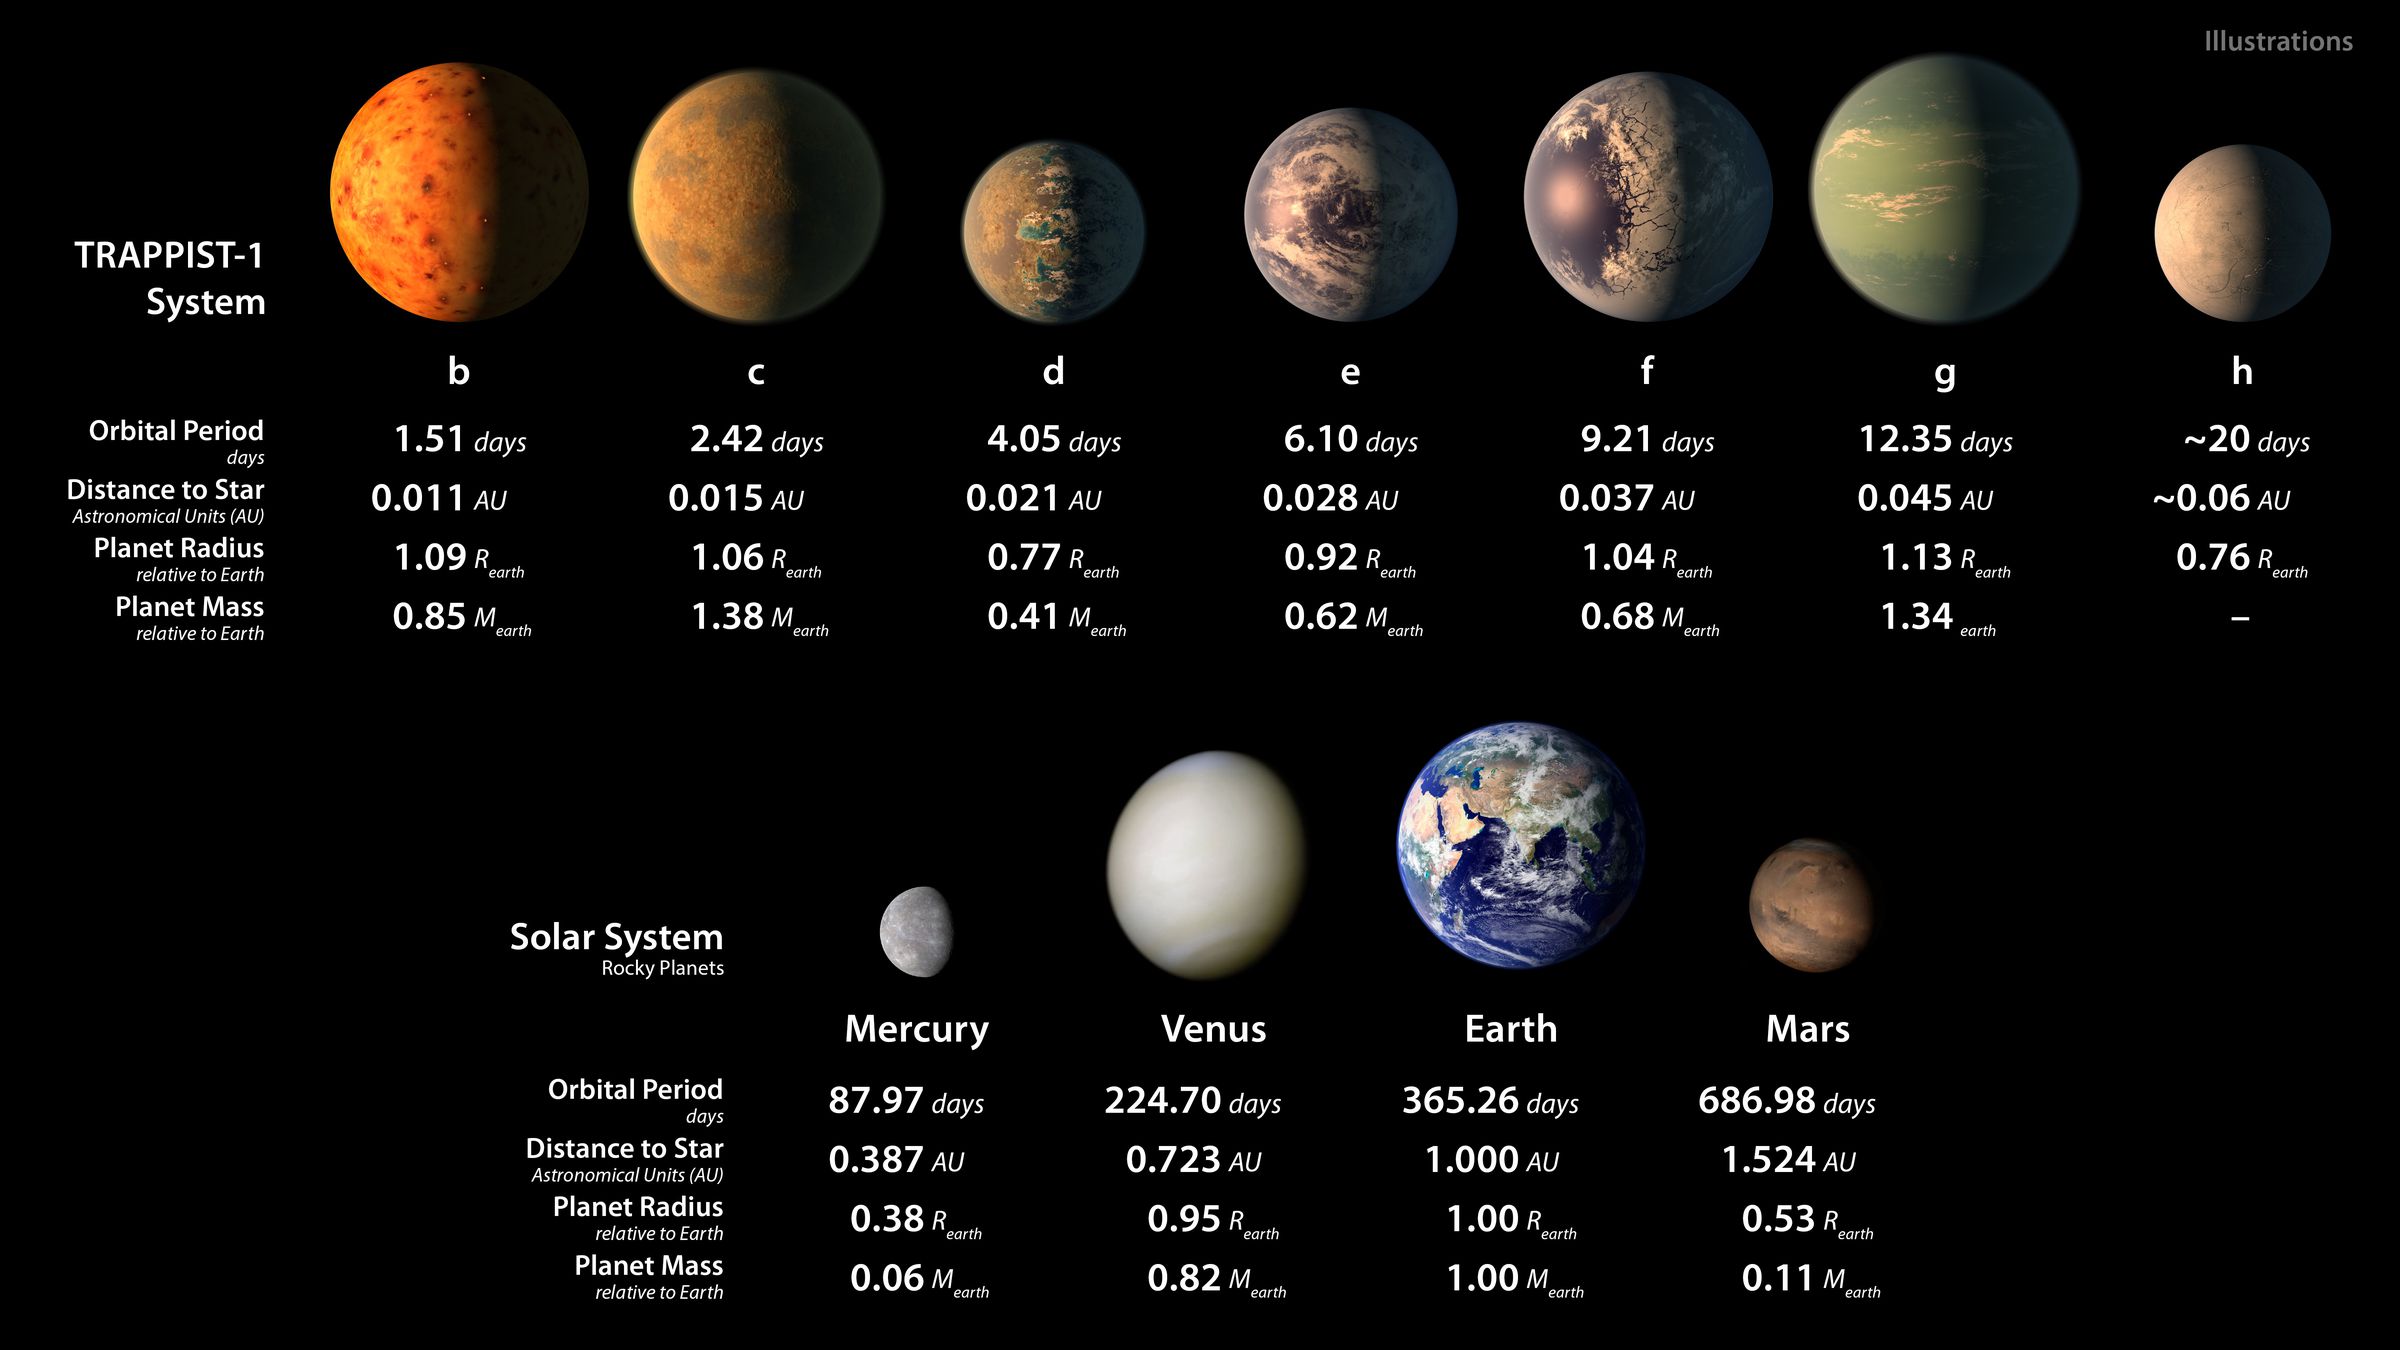 The properties of the TRAPPIST-1 planets compared to the four innermost planets in our Solar System.